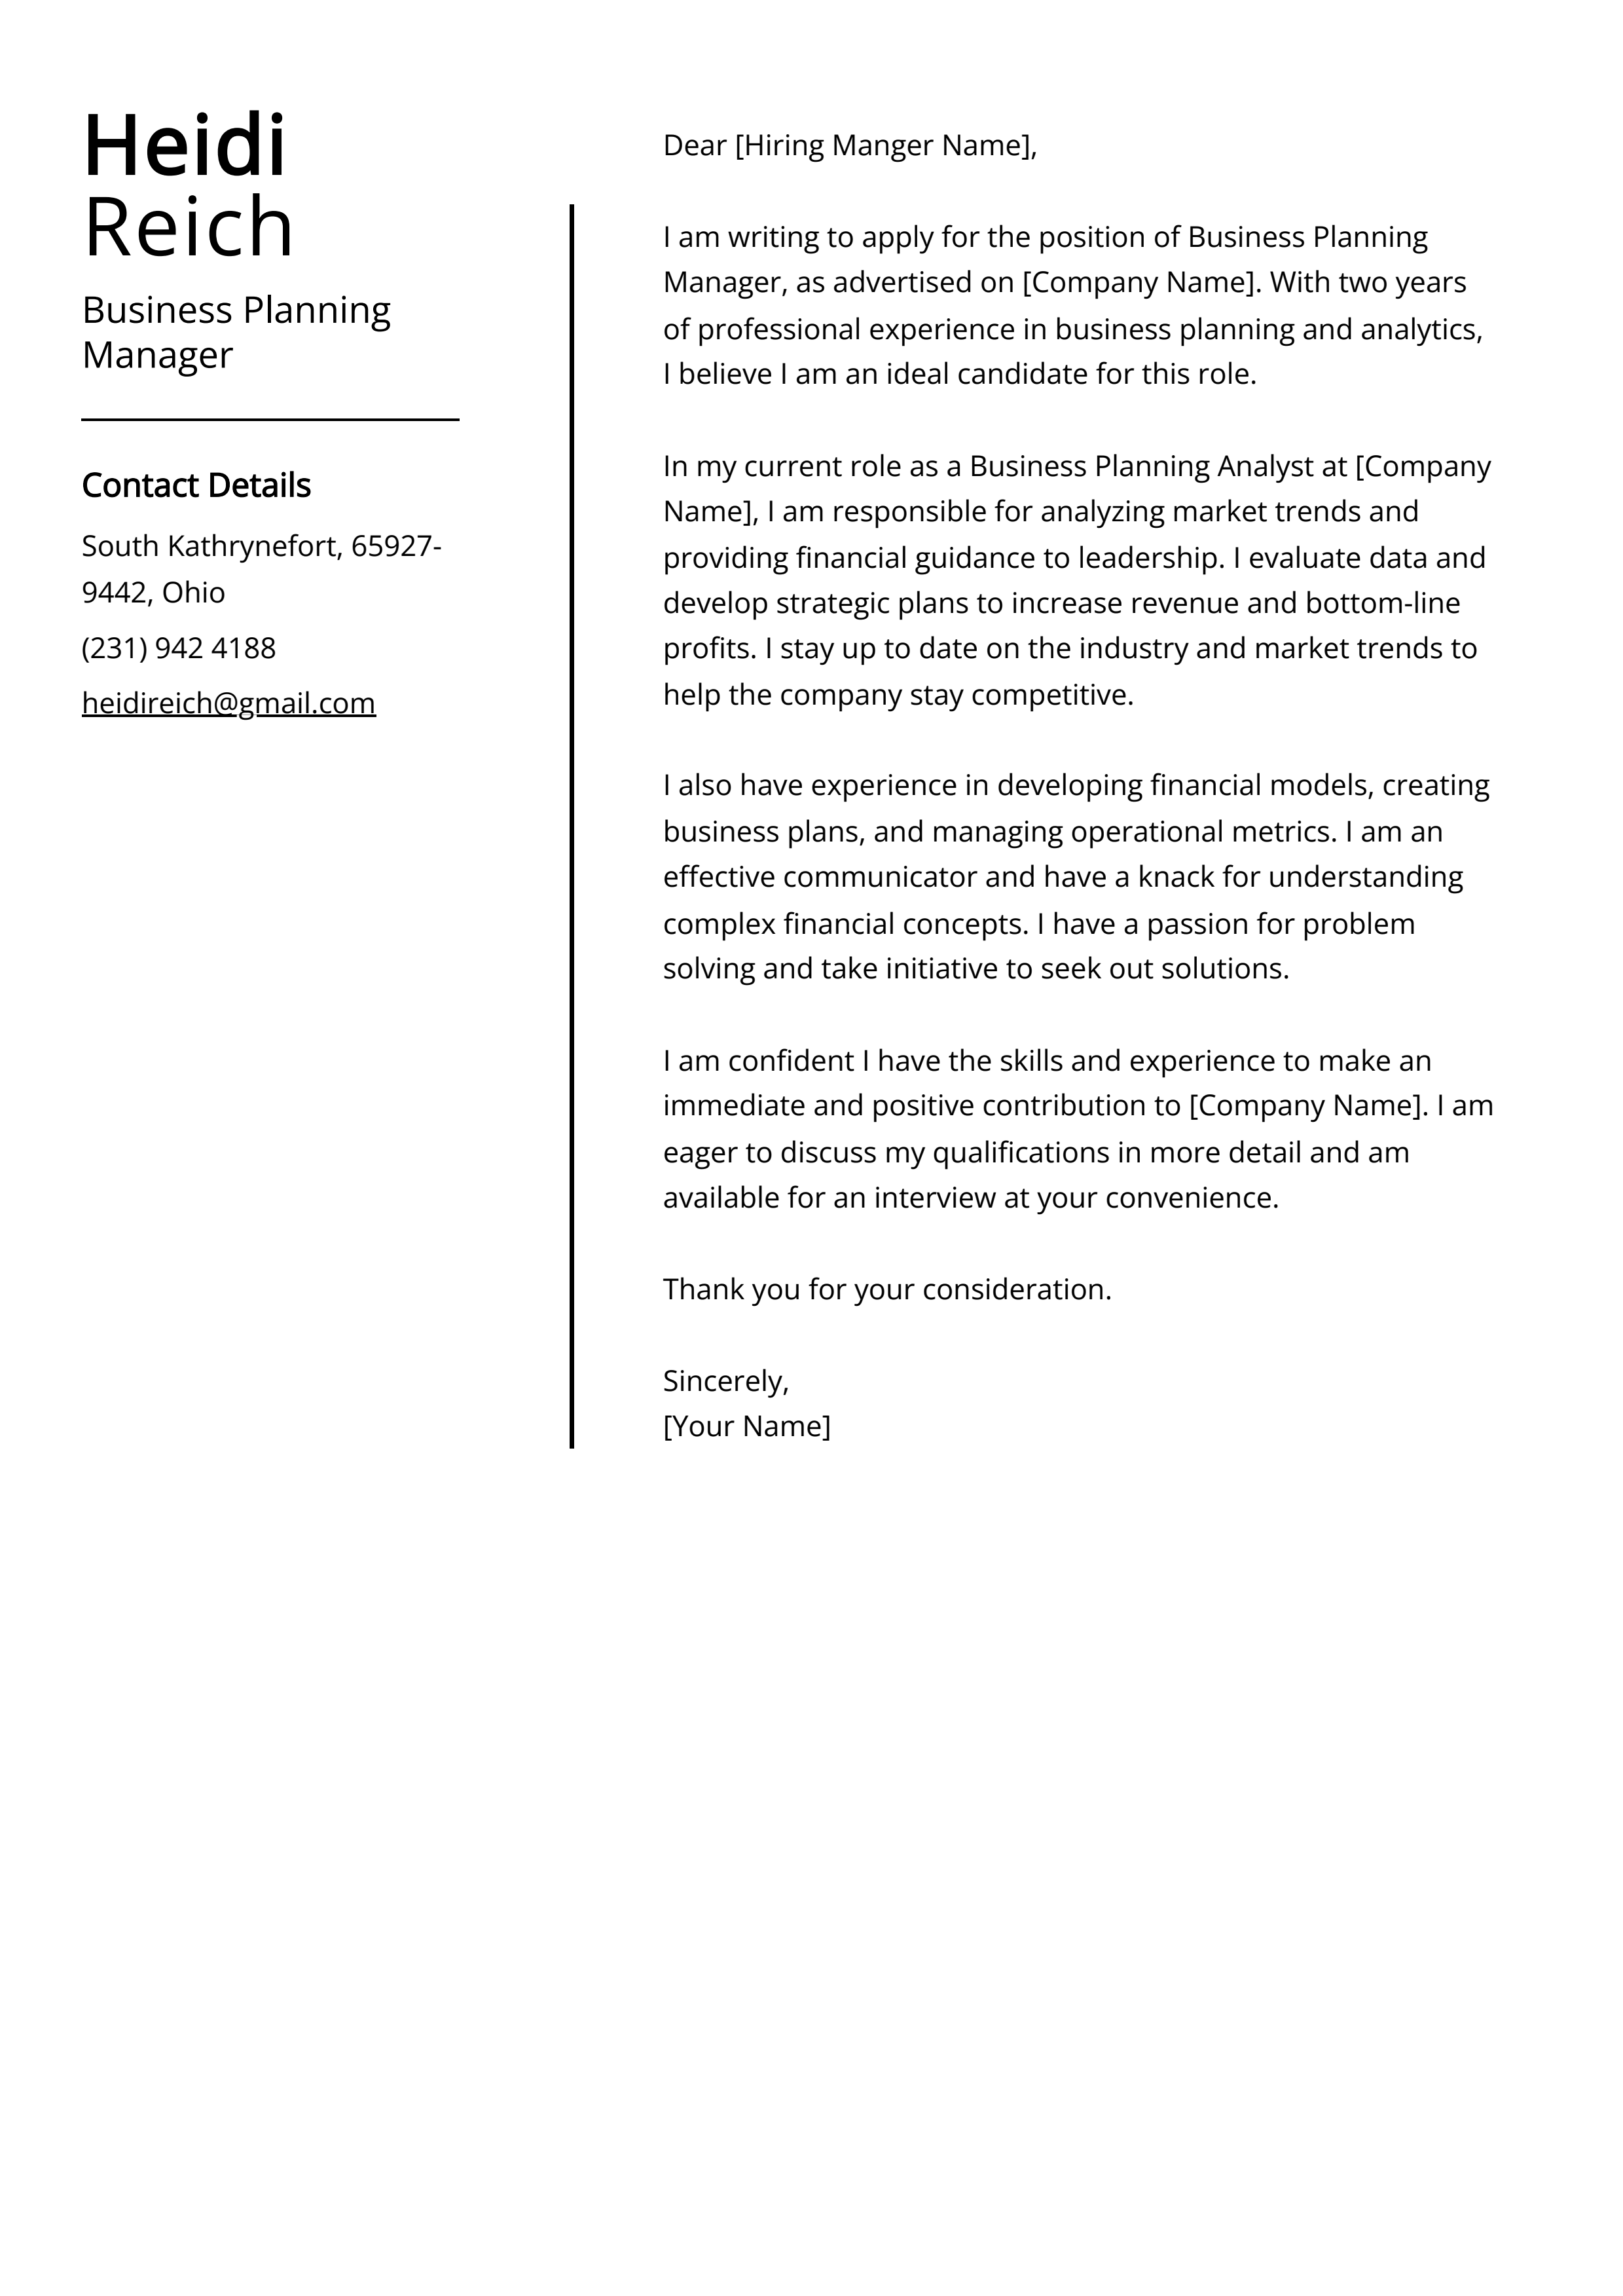 Business Planning Manager Cover Letter Example